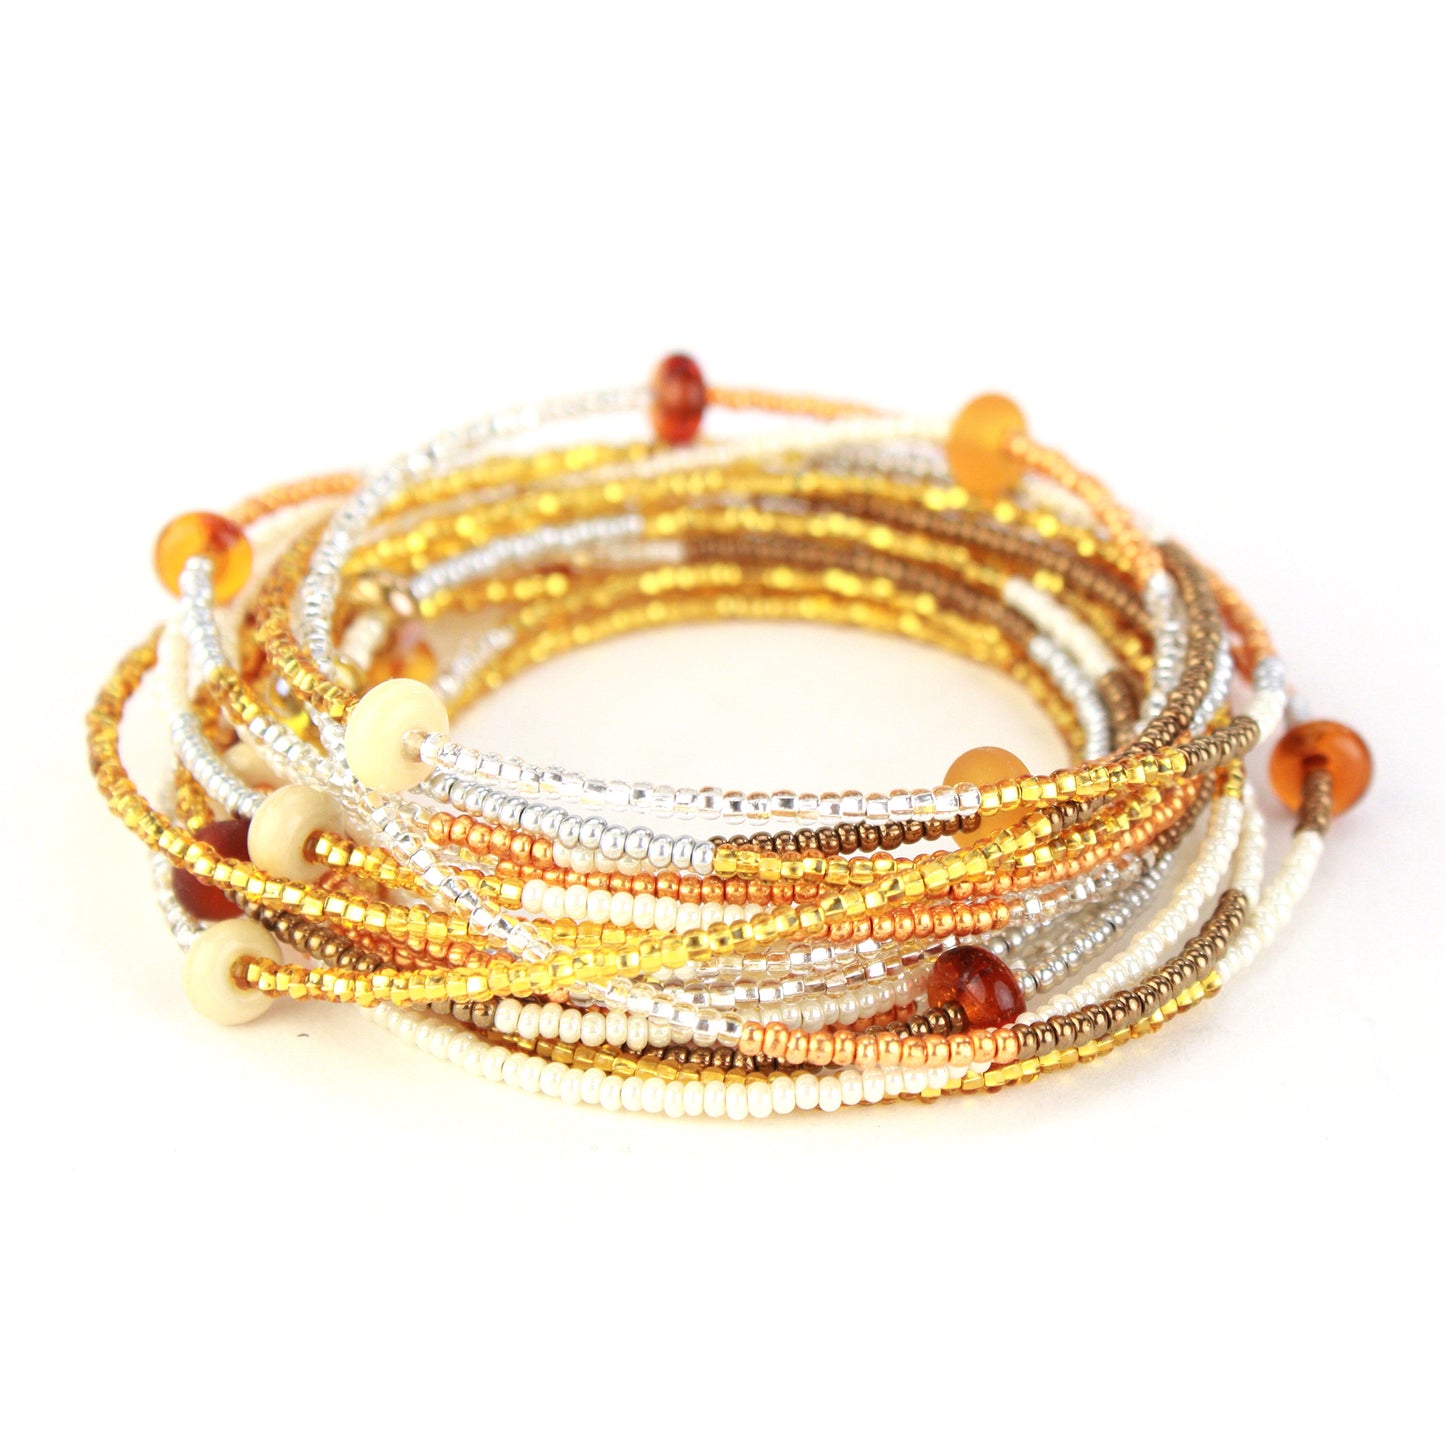 12 foot necklace -Amber, ivory and gold